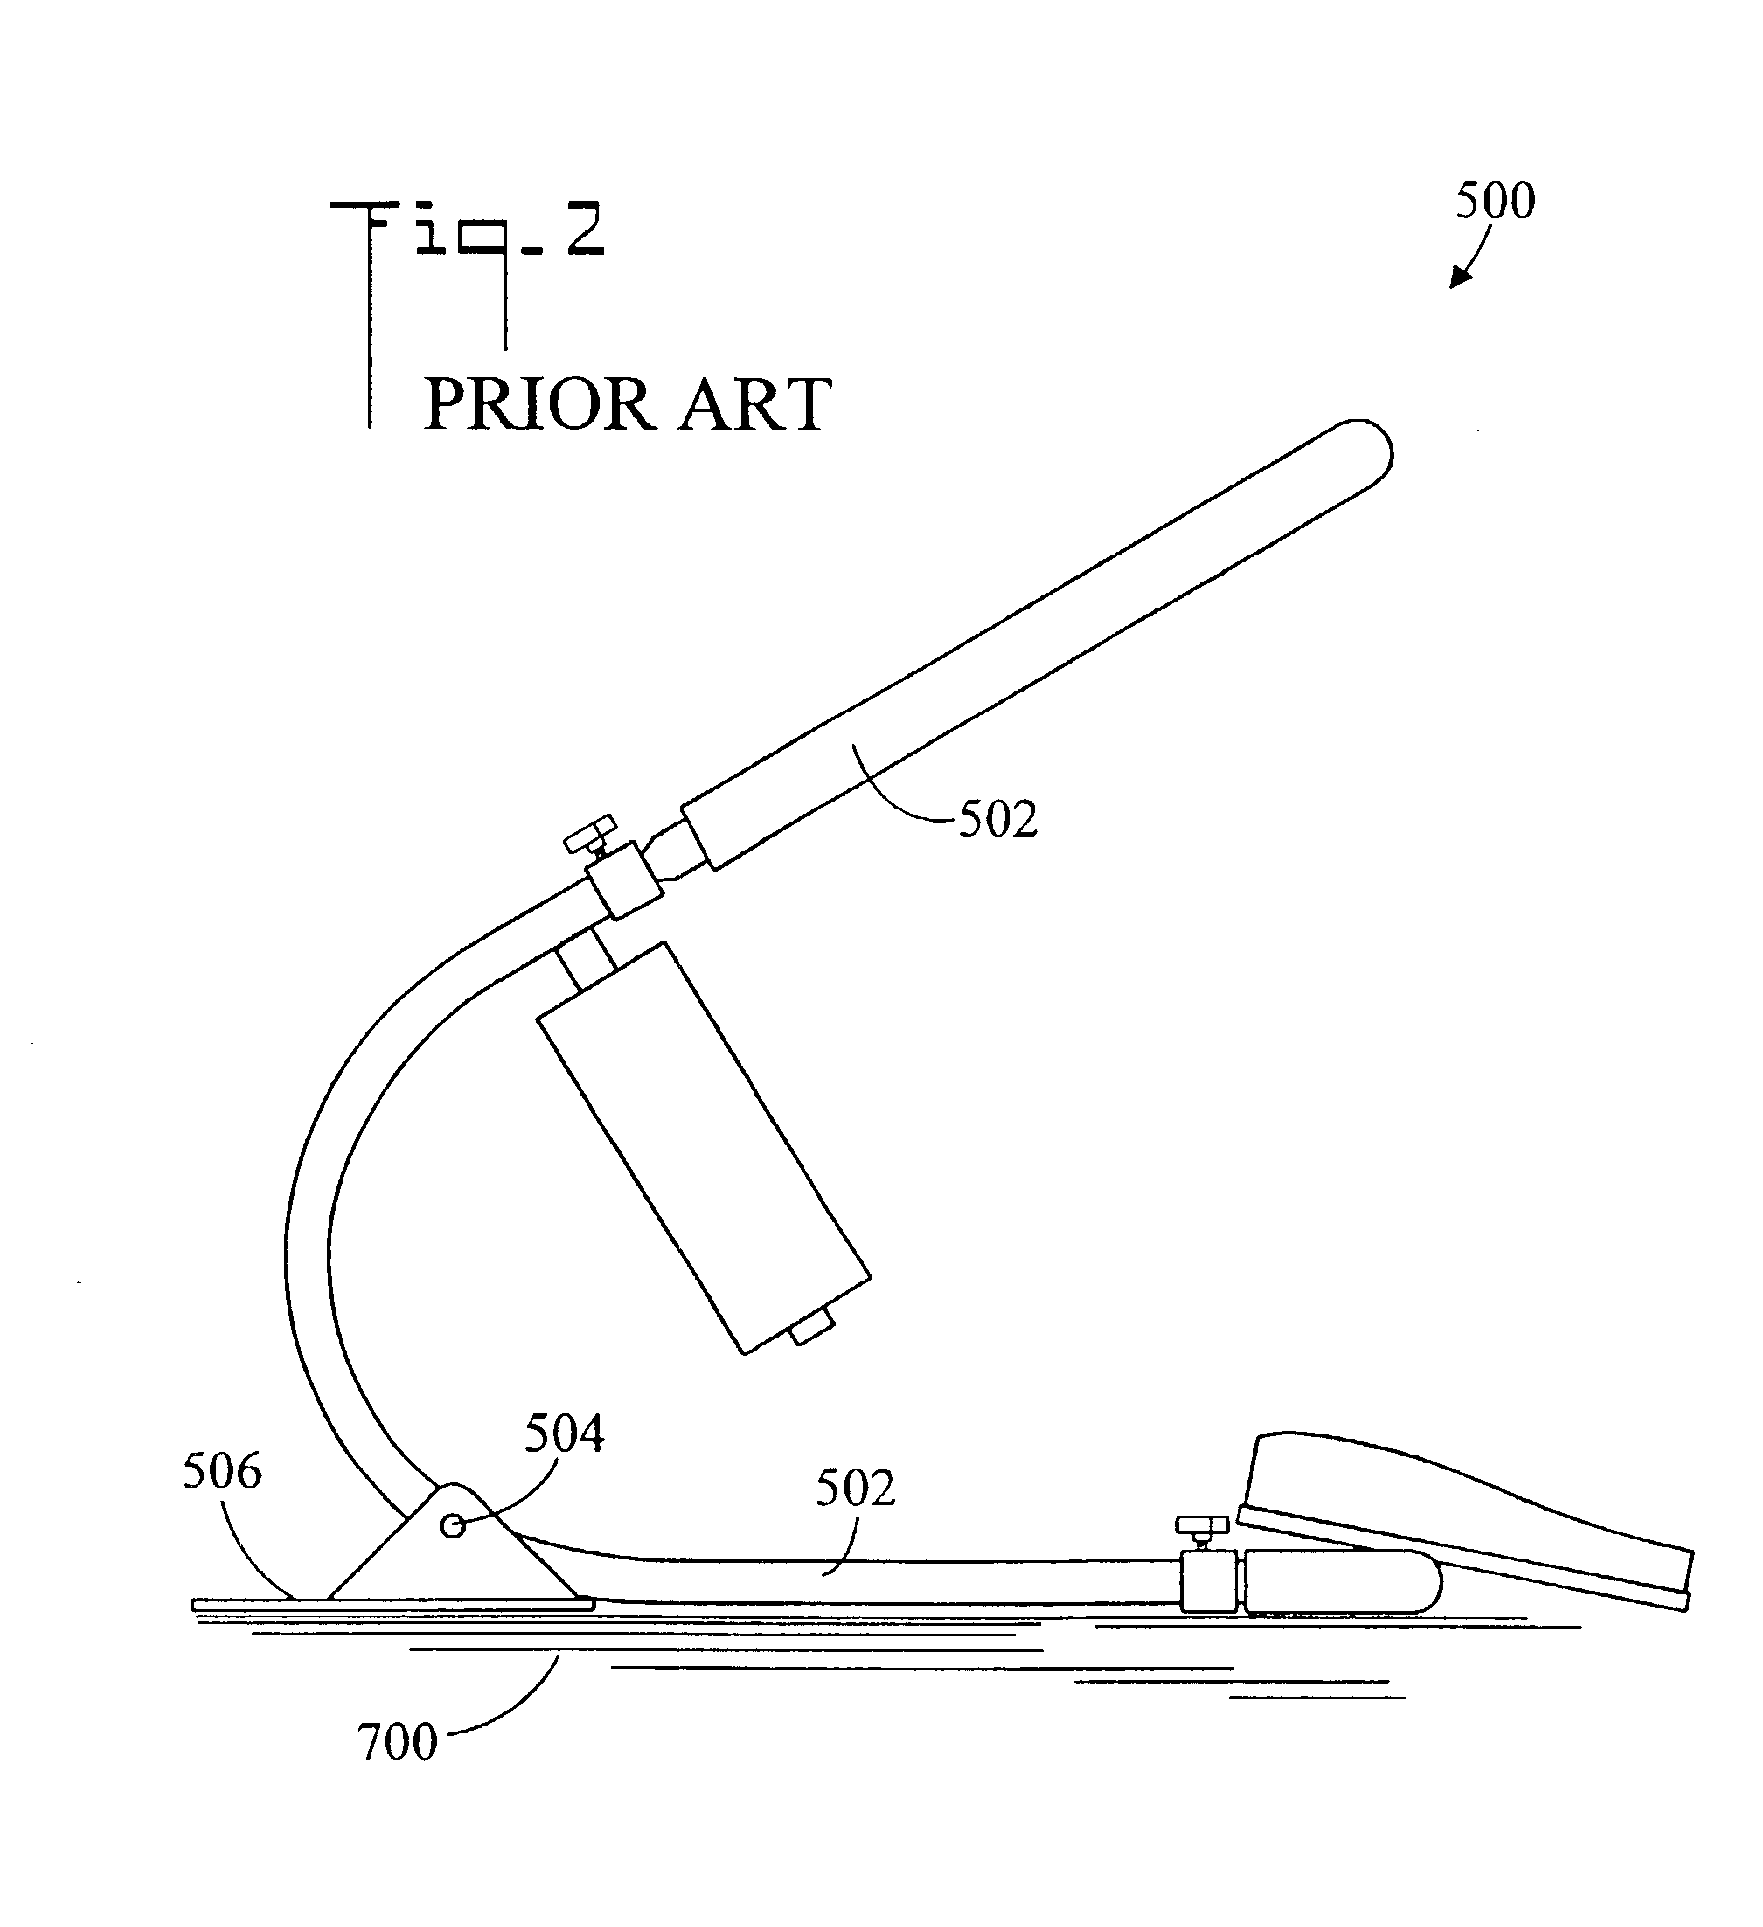 Method for applying variable electro-muscle stimulation and system therefor